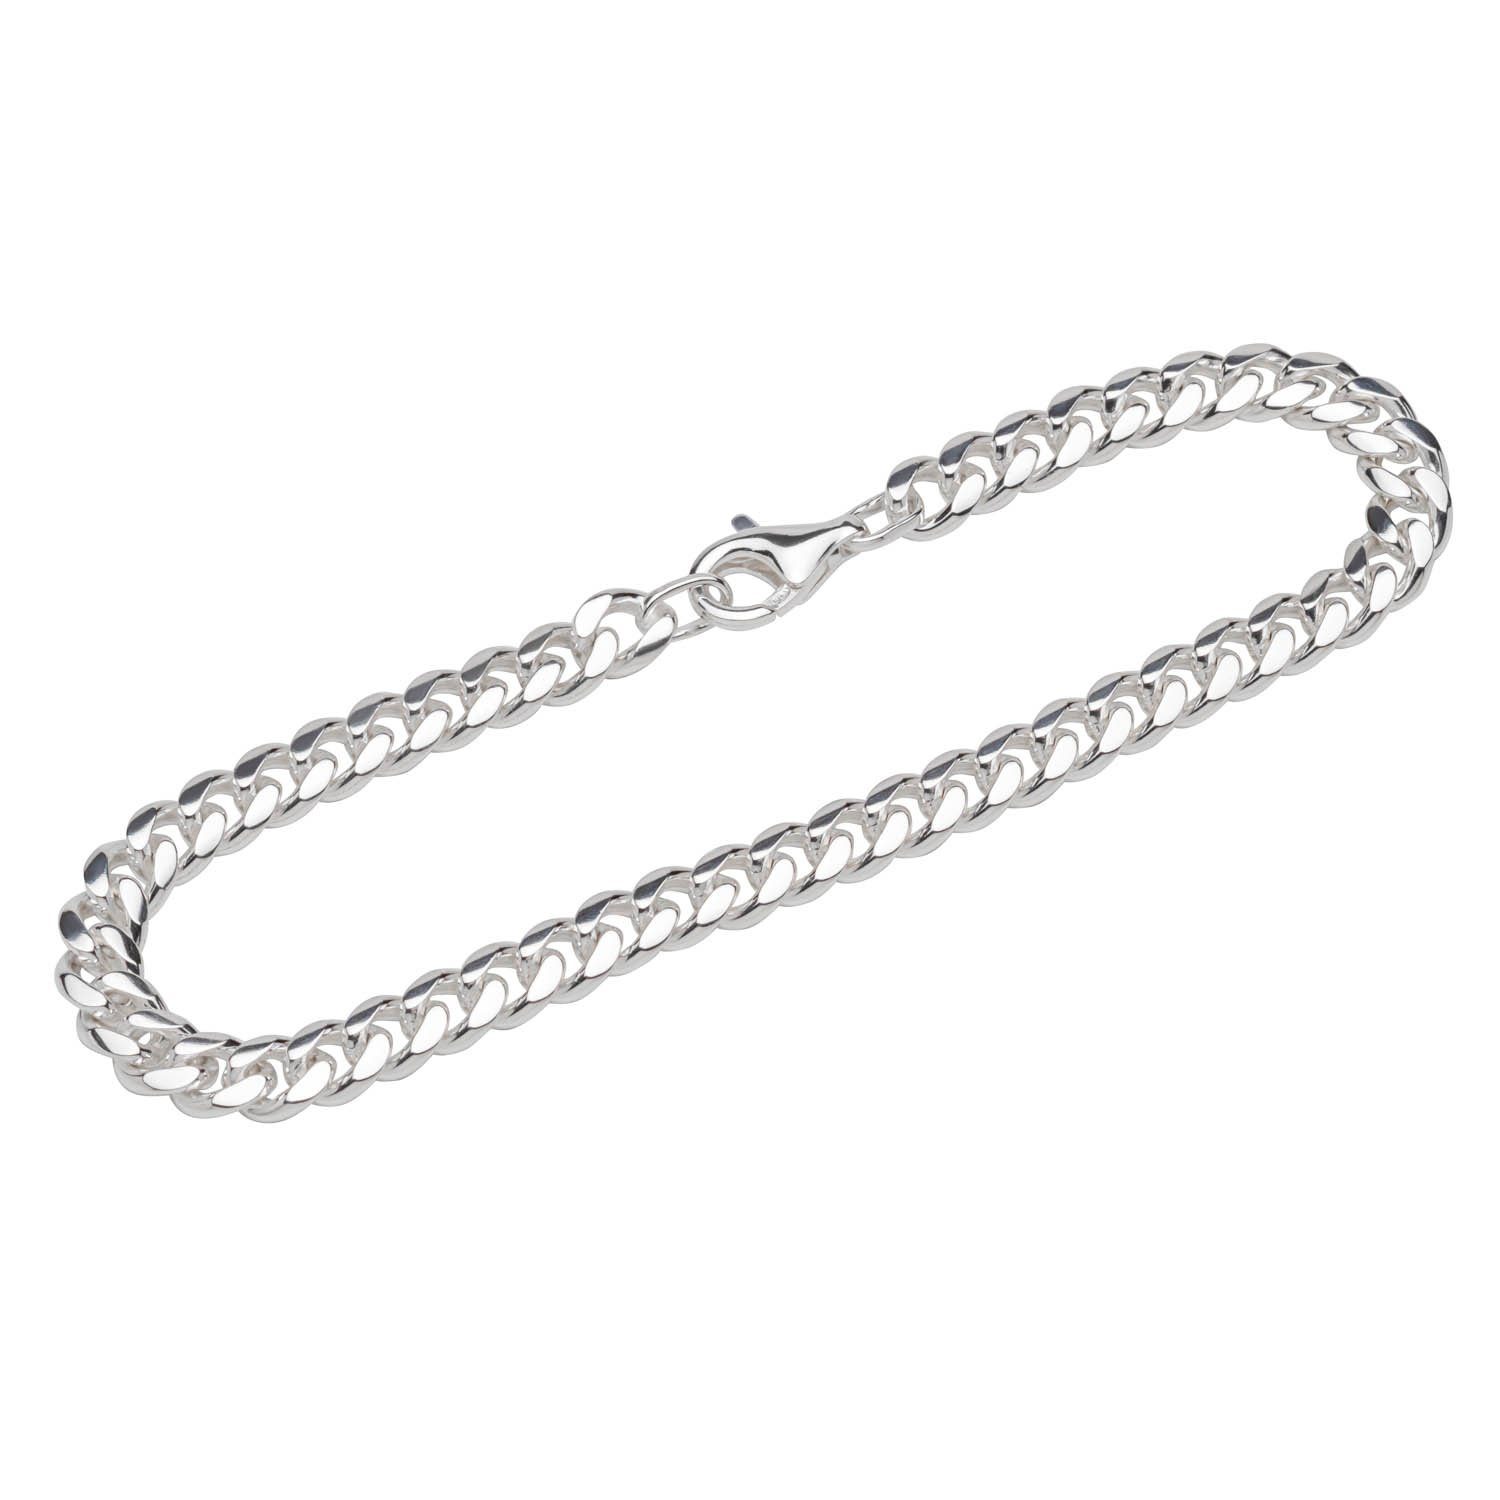 NKlaus Silberarmband Armband 925 Sterling Silber 22cm Panzerkette oval (1 Stück), Made in Germany